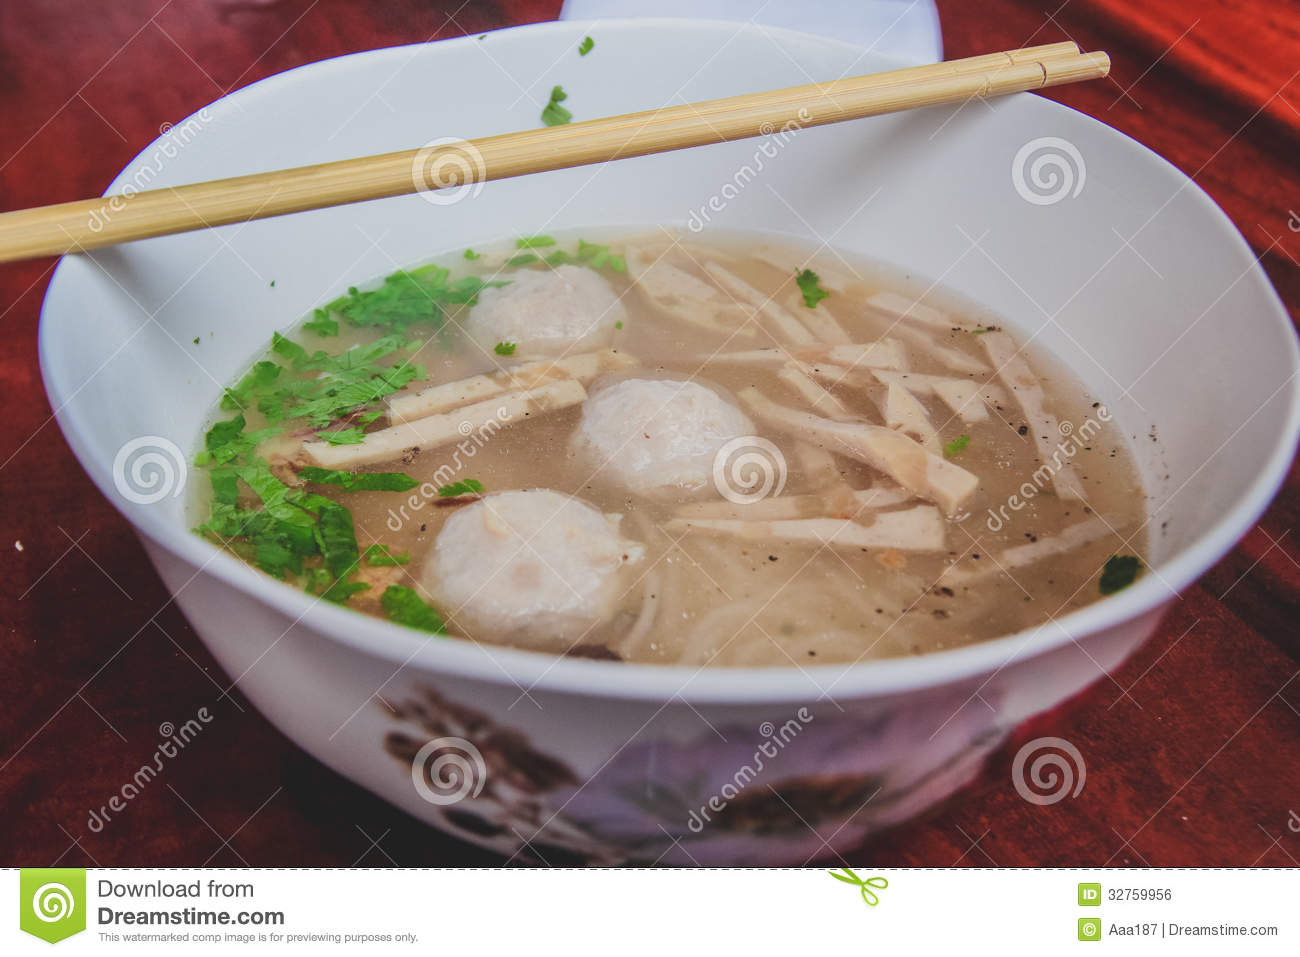 Vietnamese Rice Noodle Soup Royalty Free Stock Image   Image  32759956